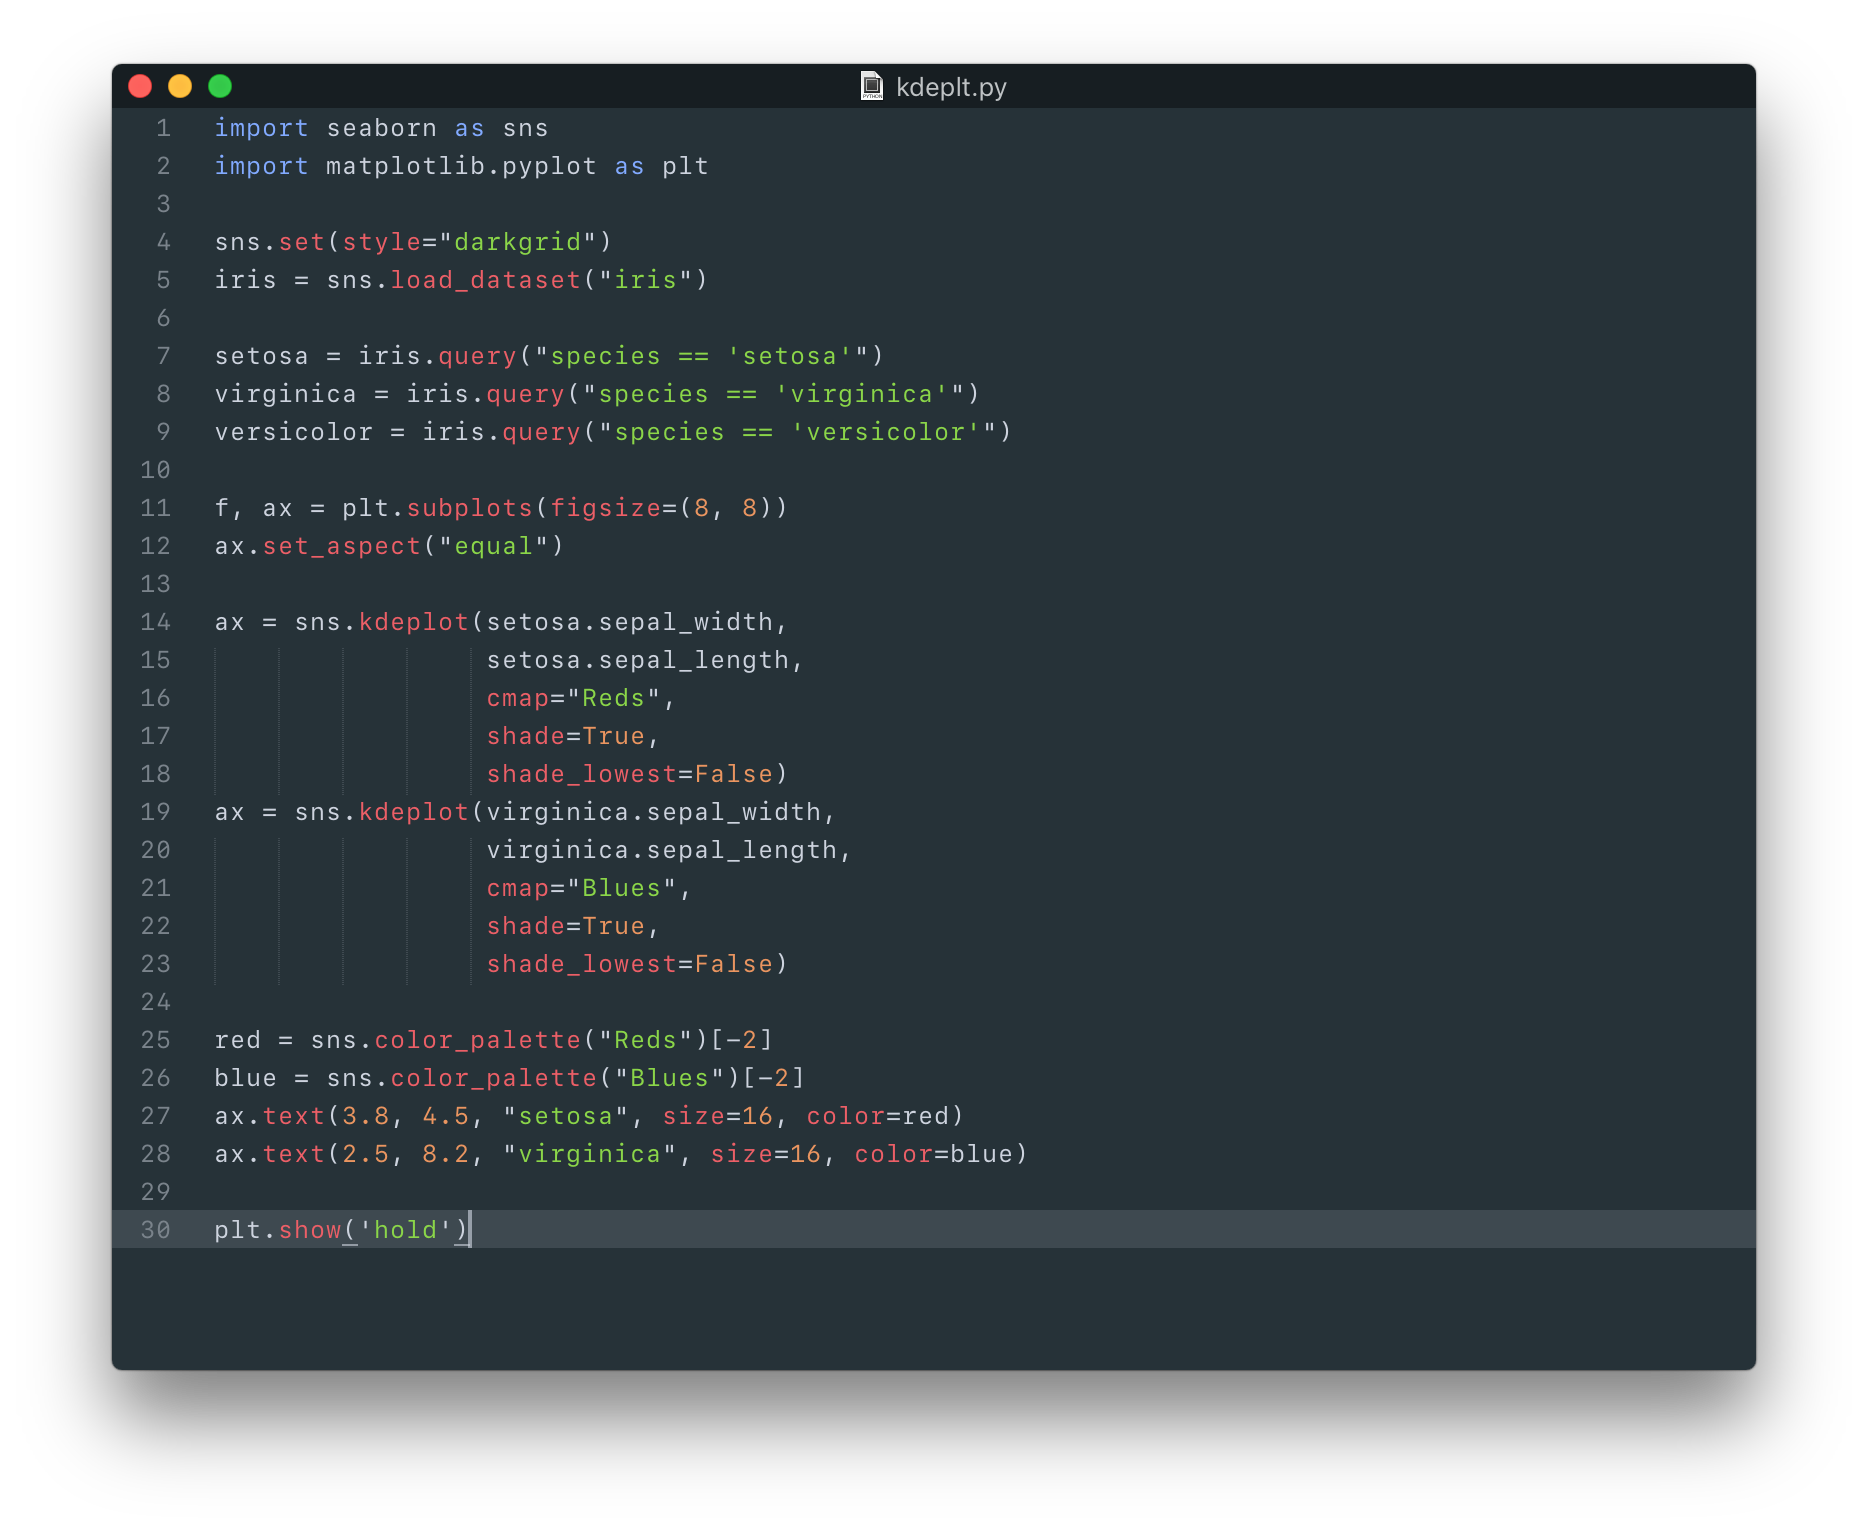 adaptive theme of sublime text 3